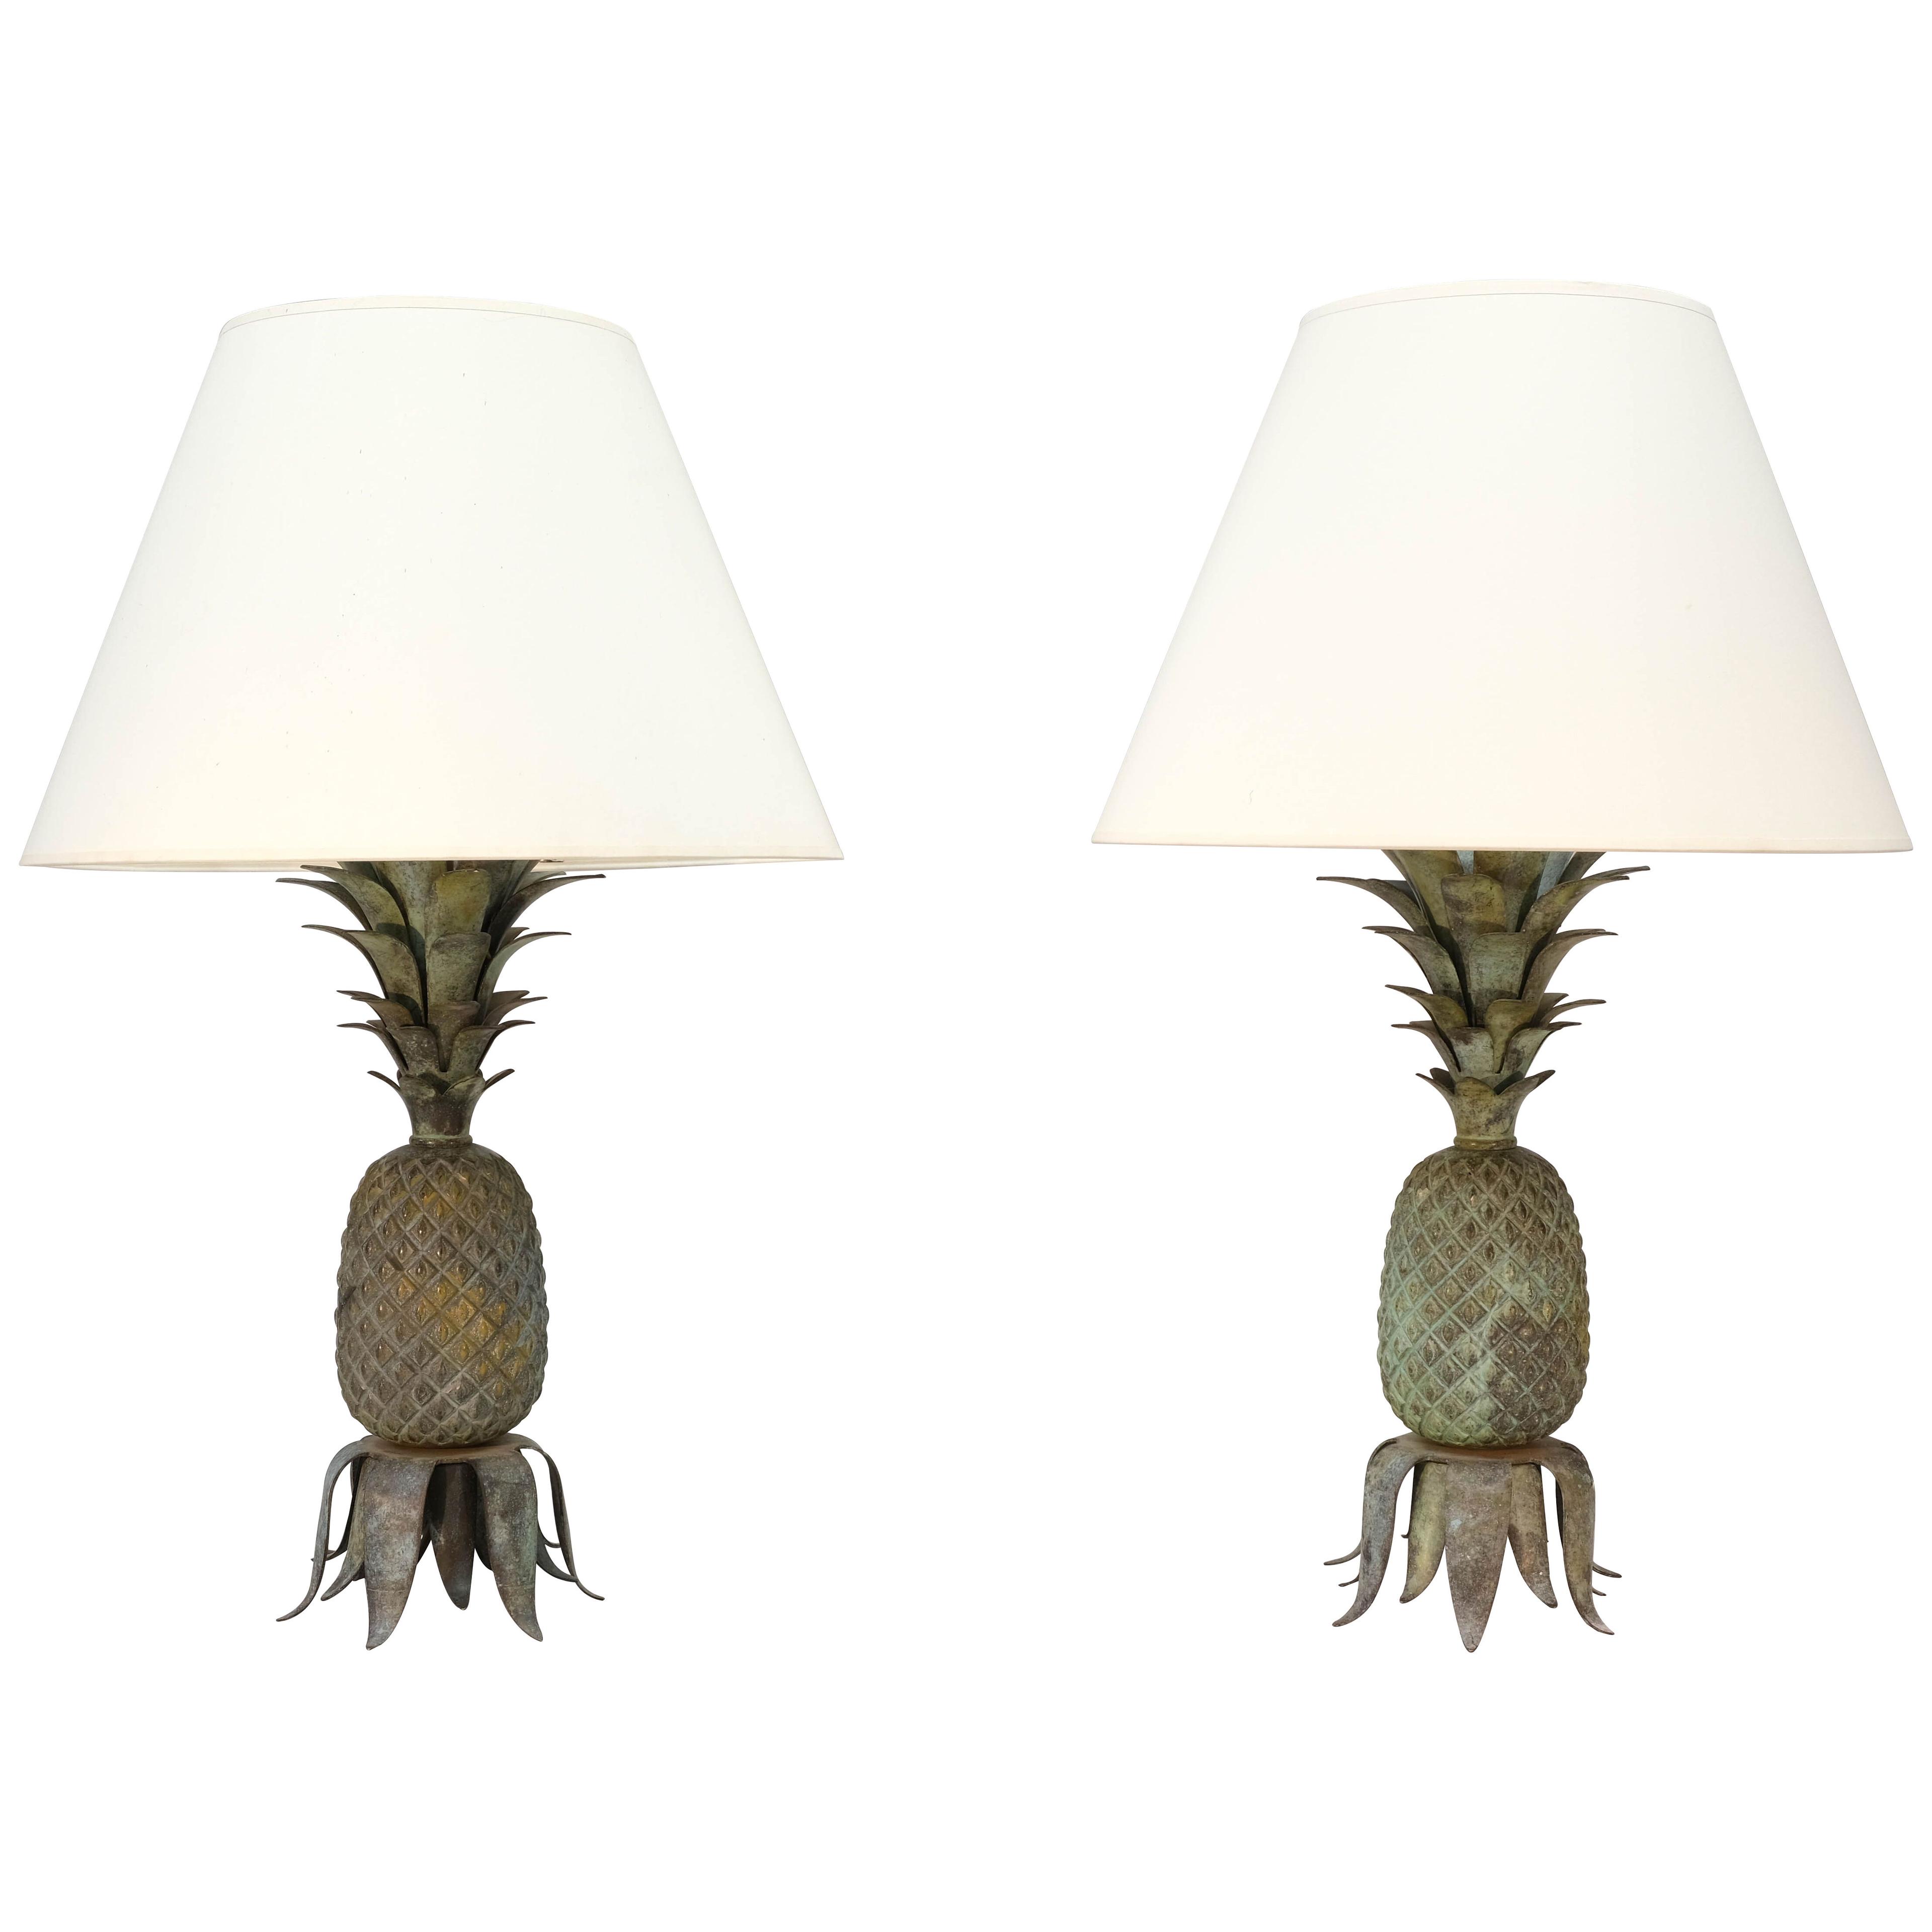 A pair of mid 20th century bronze lamps in the form of pineapples. 